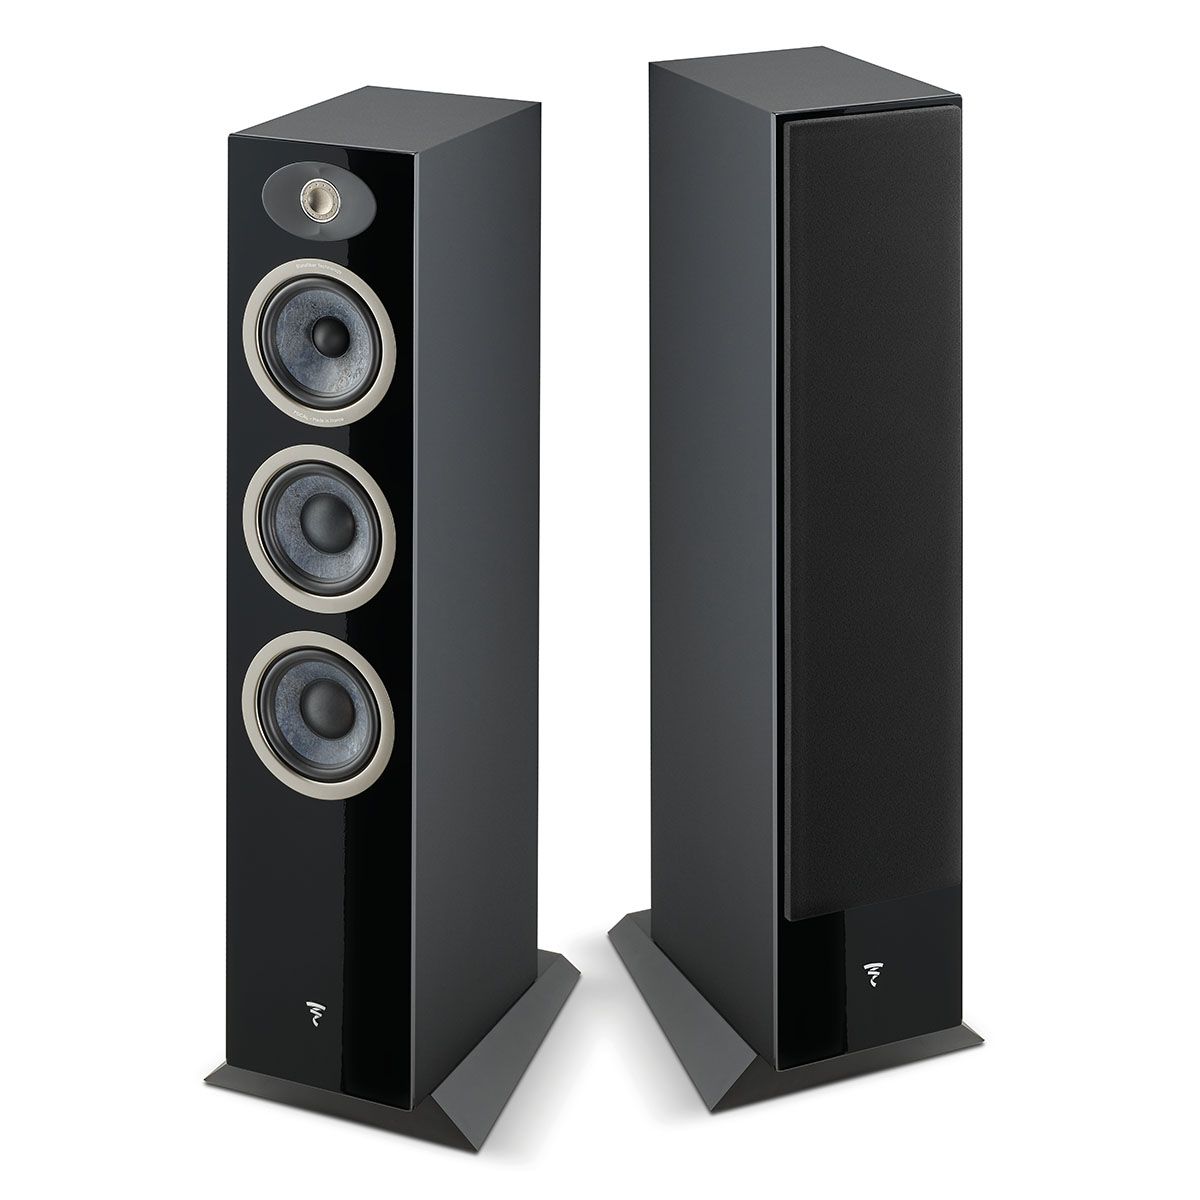 Focal Theva No2 Floorstanding Speaker - Each - view of black pair, one with grille, one without grille